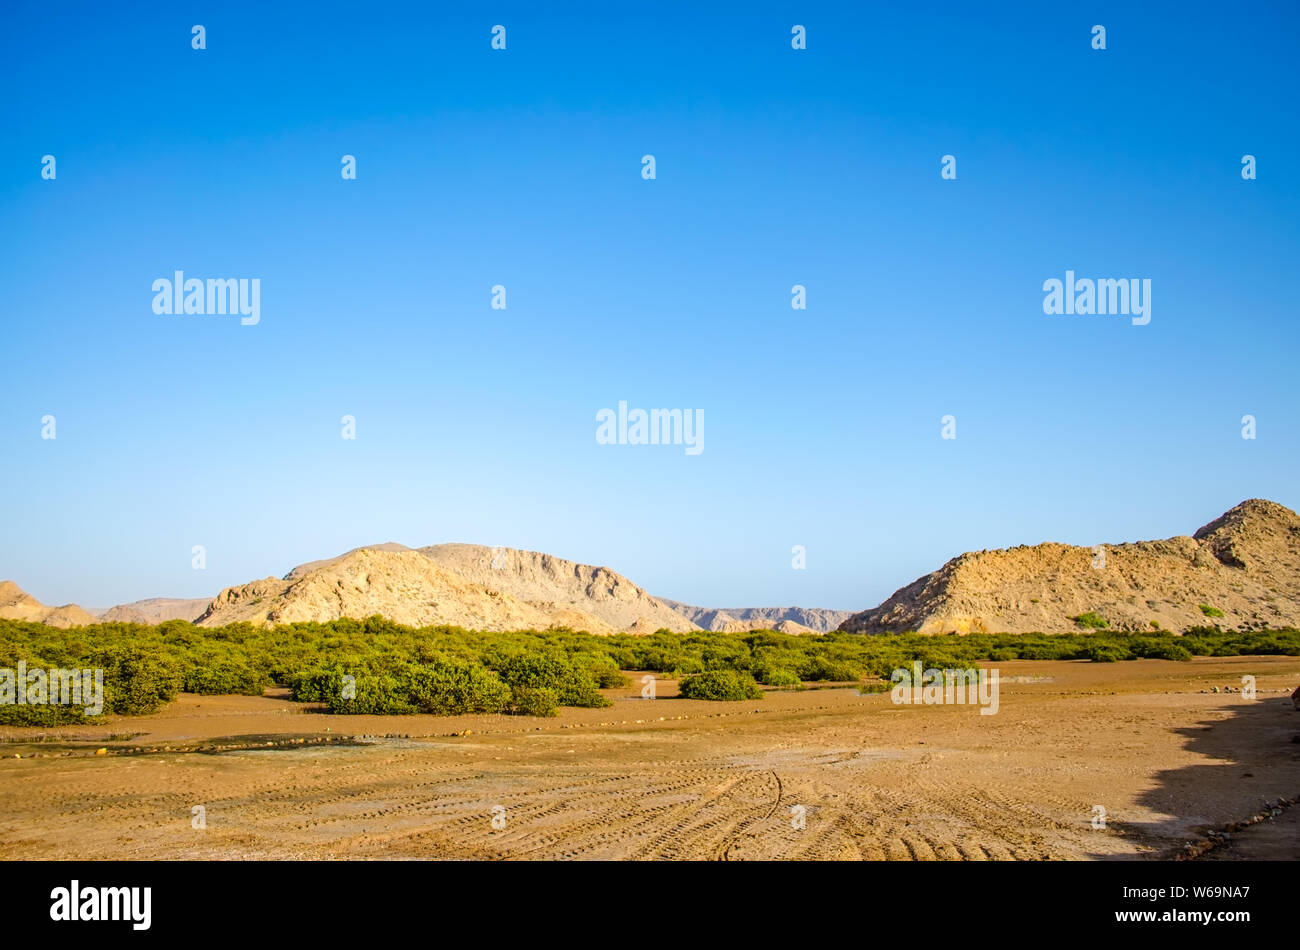 Swamp with green bush landscape with mountains and a clear blue sky. From Muscat, Oman. Stock Photo